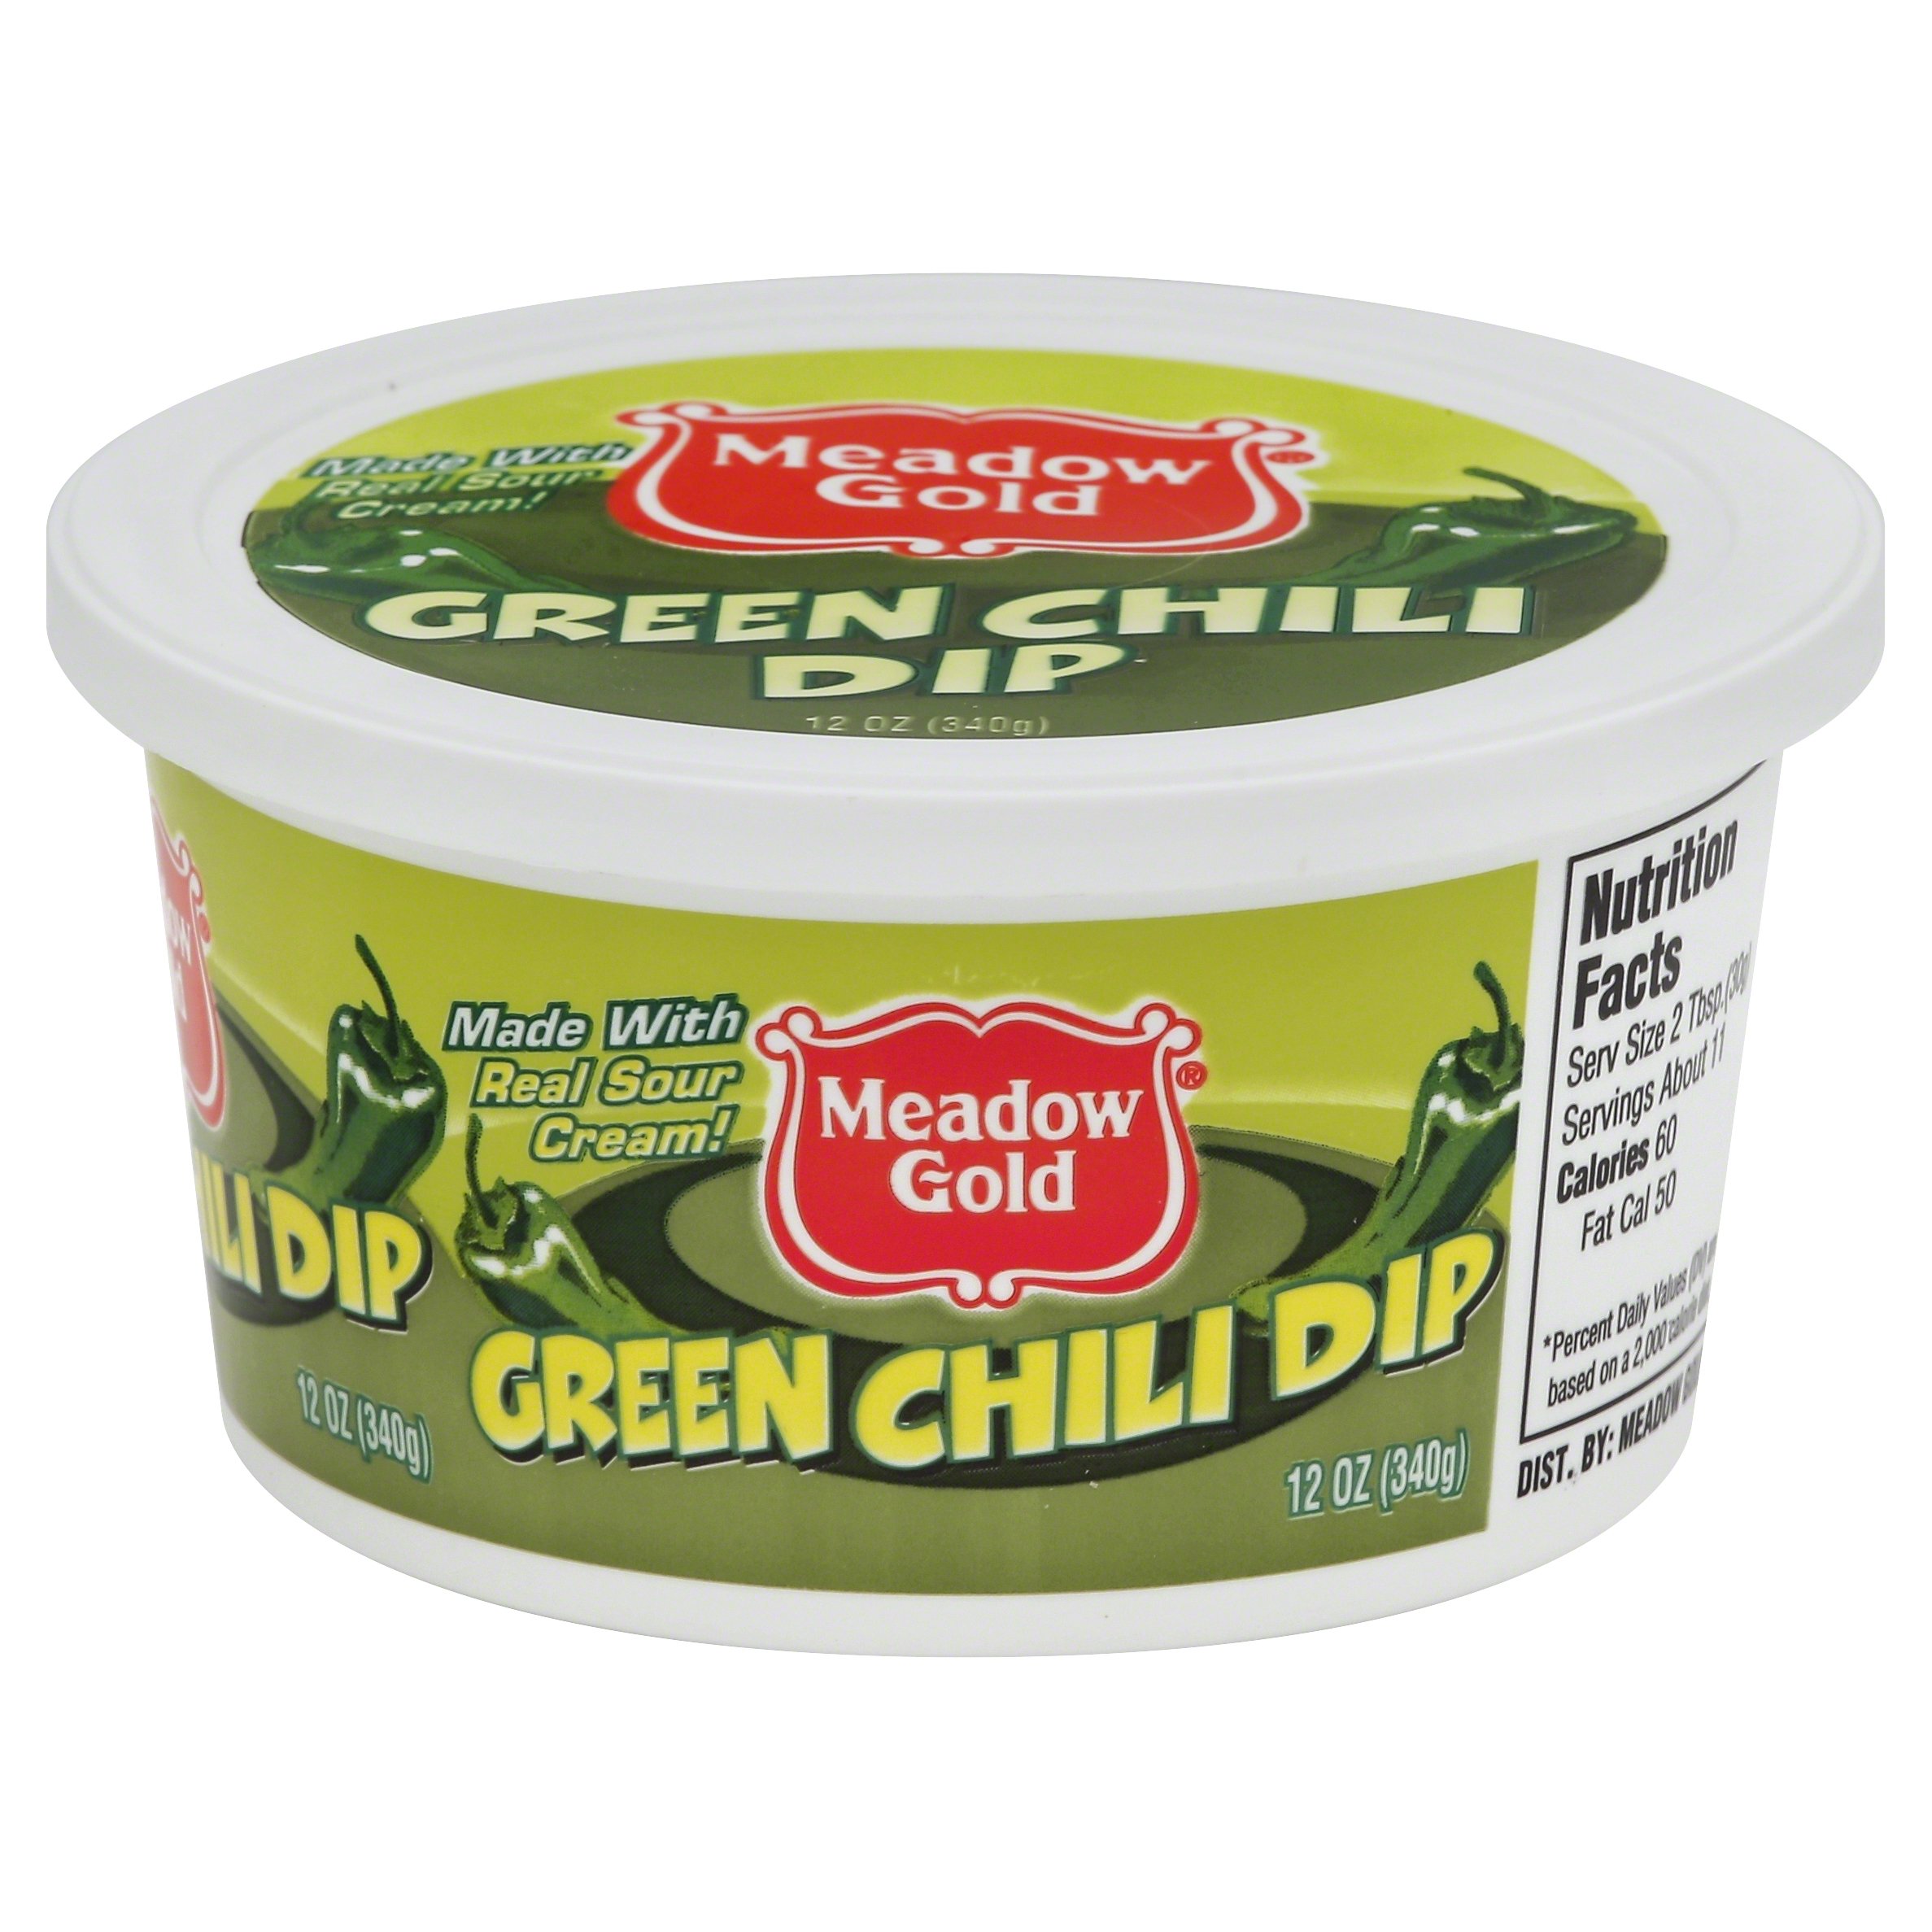 Meadow Gold Green Chili Dip